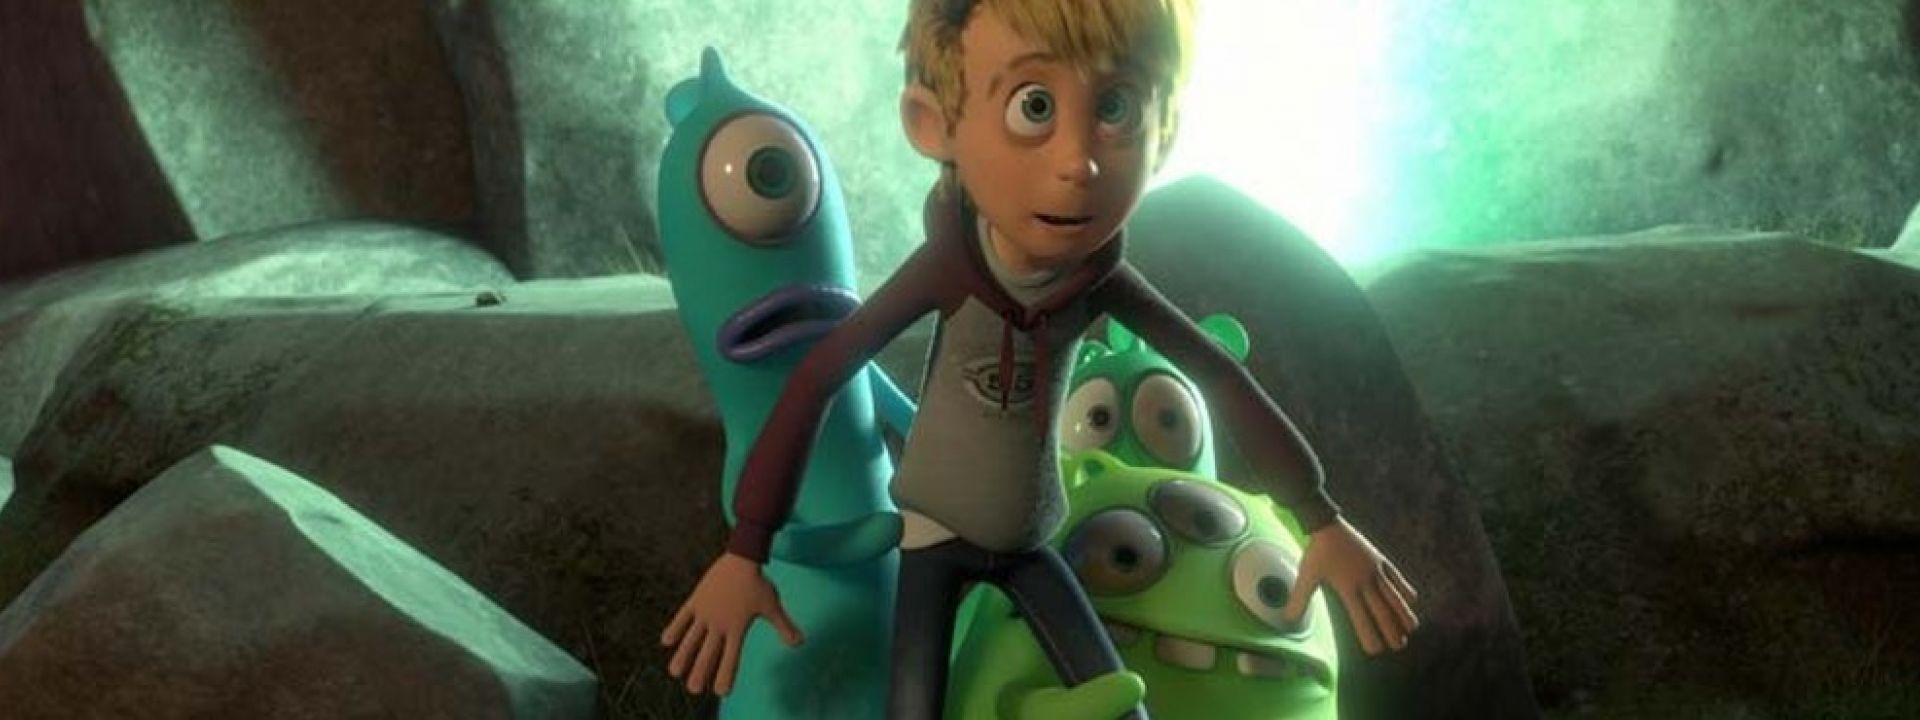 Park Your Cinema Kids: Luis and the Aliens (2018) - Εικόνα